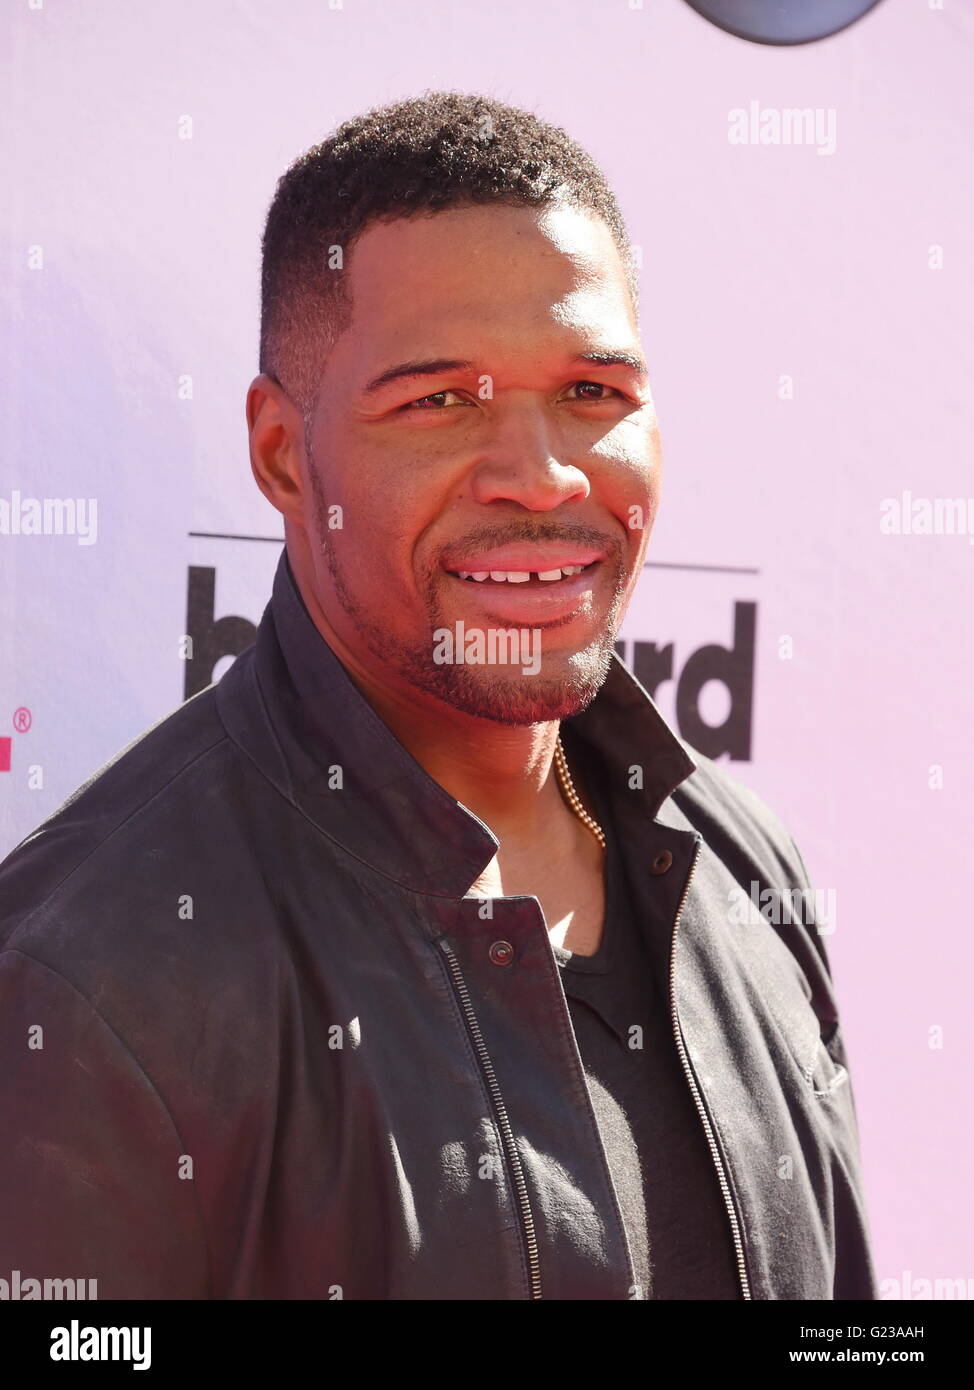 LAS VEGAS, NV - MAY 22: TV personality Michael Strahan attends the 2016 Billboard Music Awards at T-Mobile Arena on May 22, 2016 in Las Vegas, Nevada. | Verwendung weltweit Stock Photo